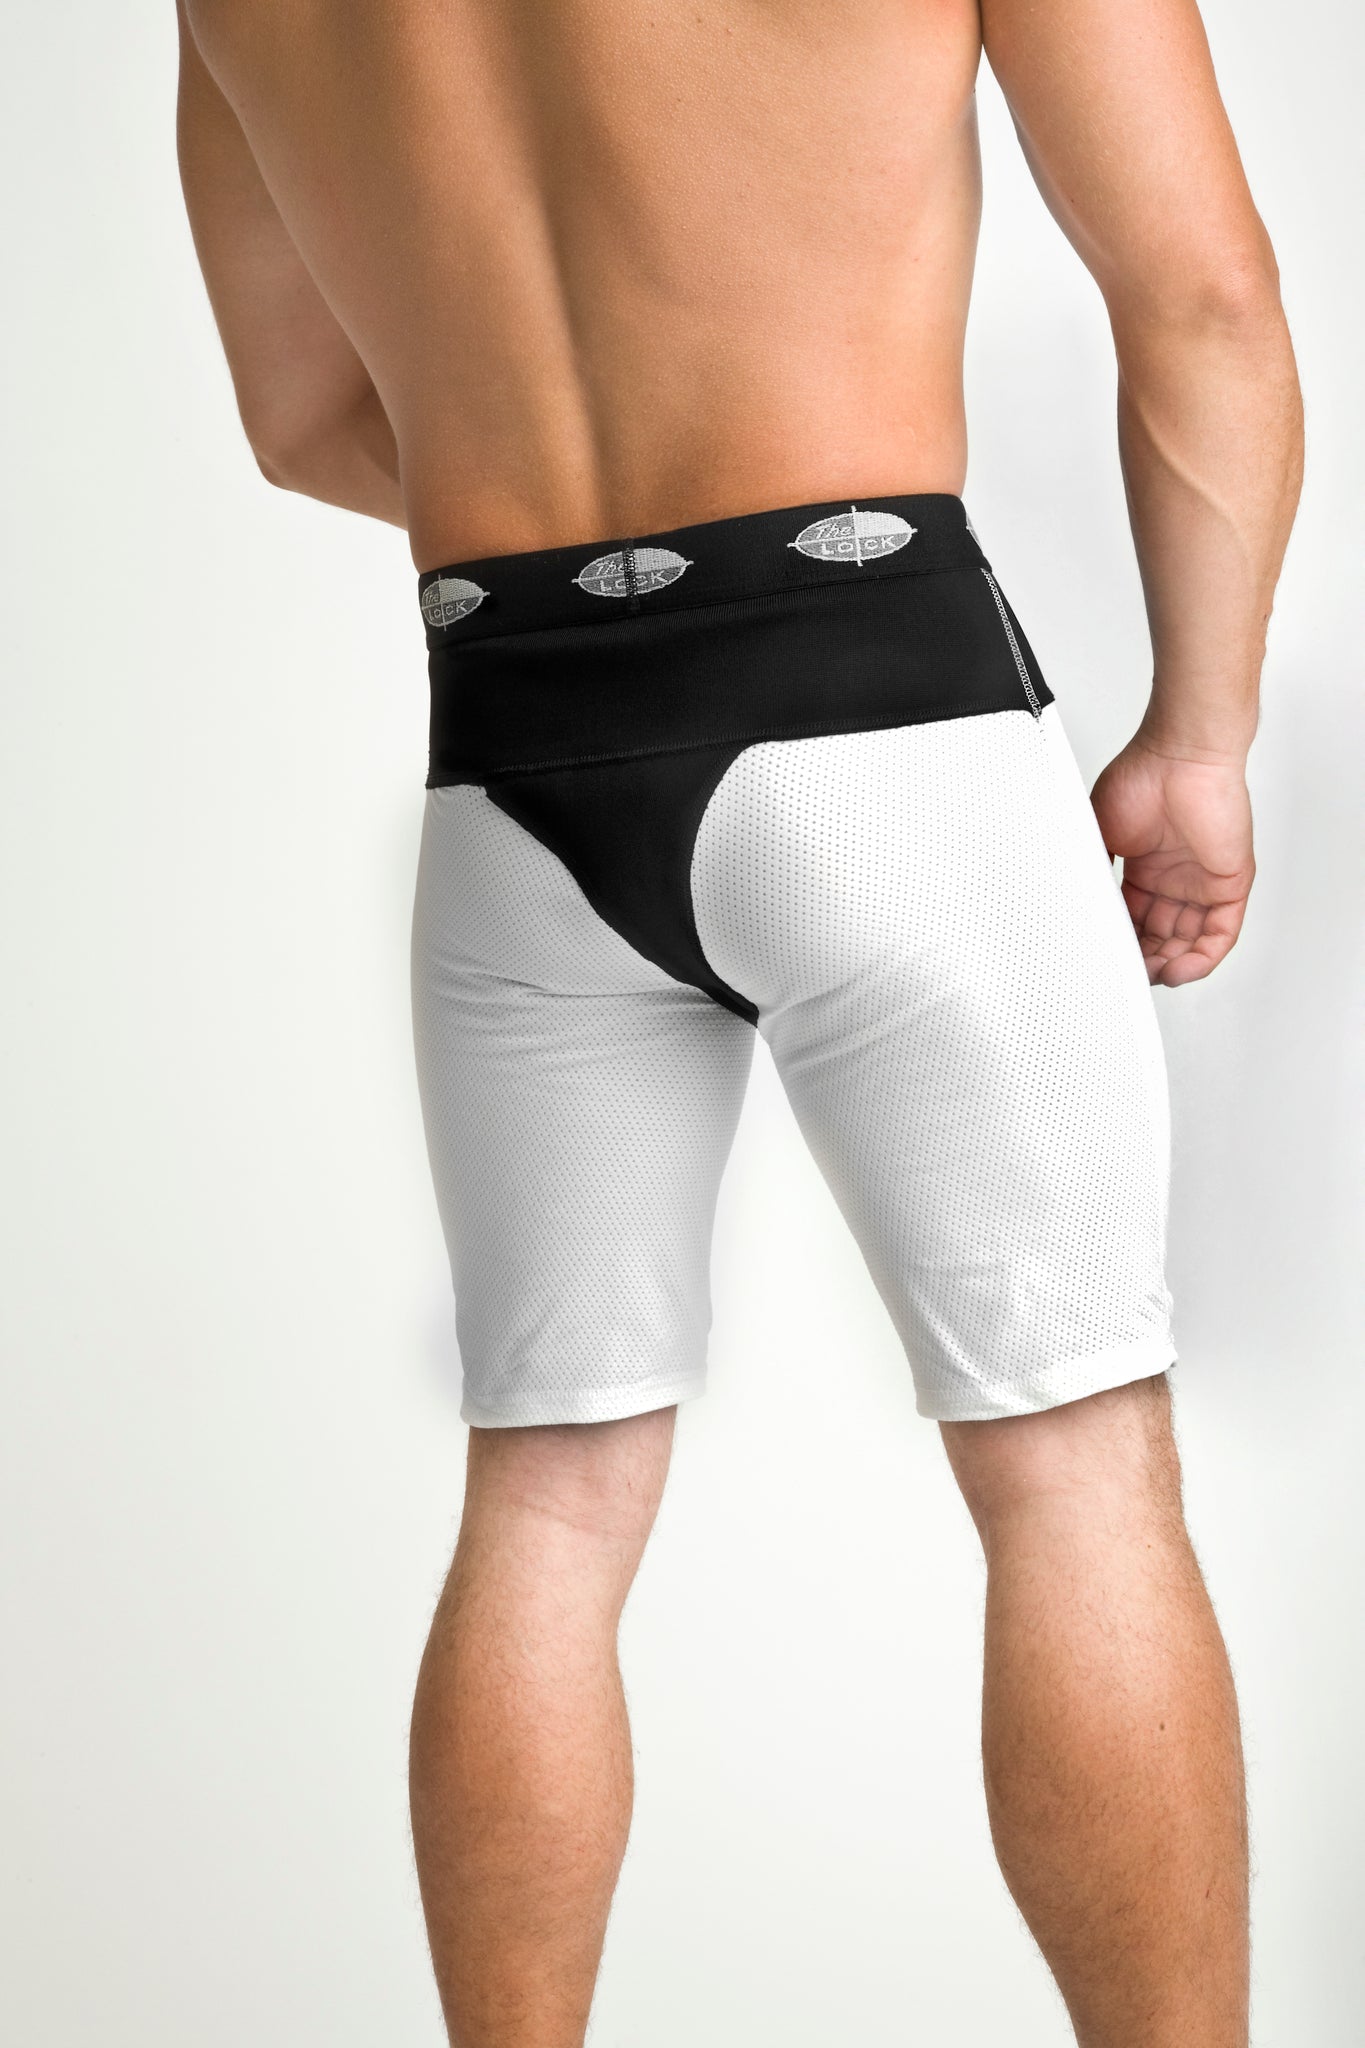 THE LOCK MMA FULL CORE COMPRESSION SHORT WITH POCKET – Lock Apparel Inc.